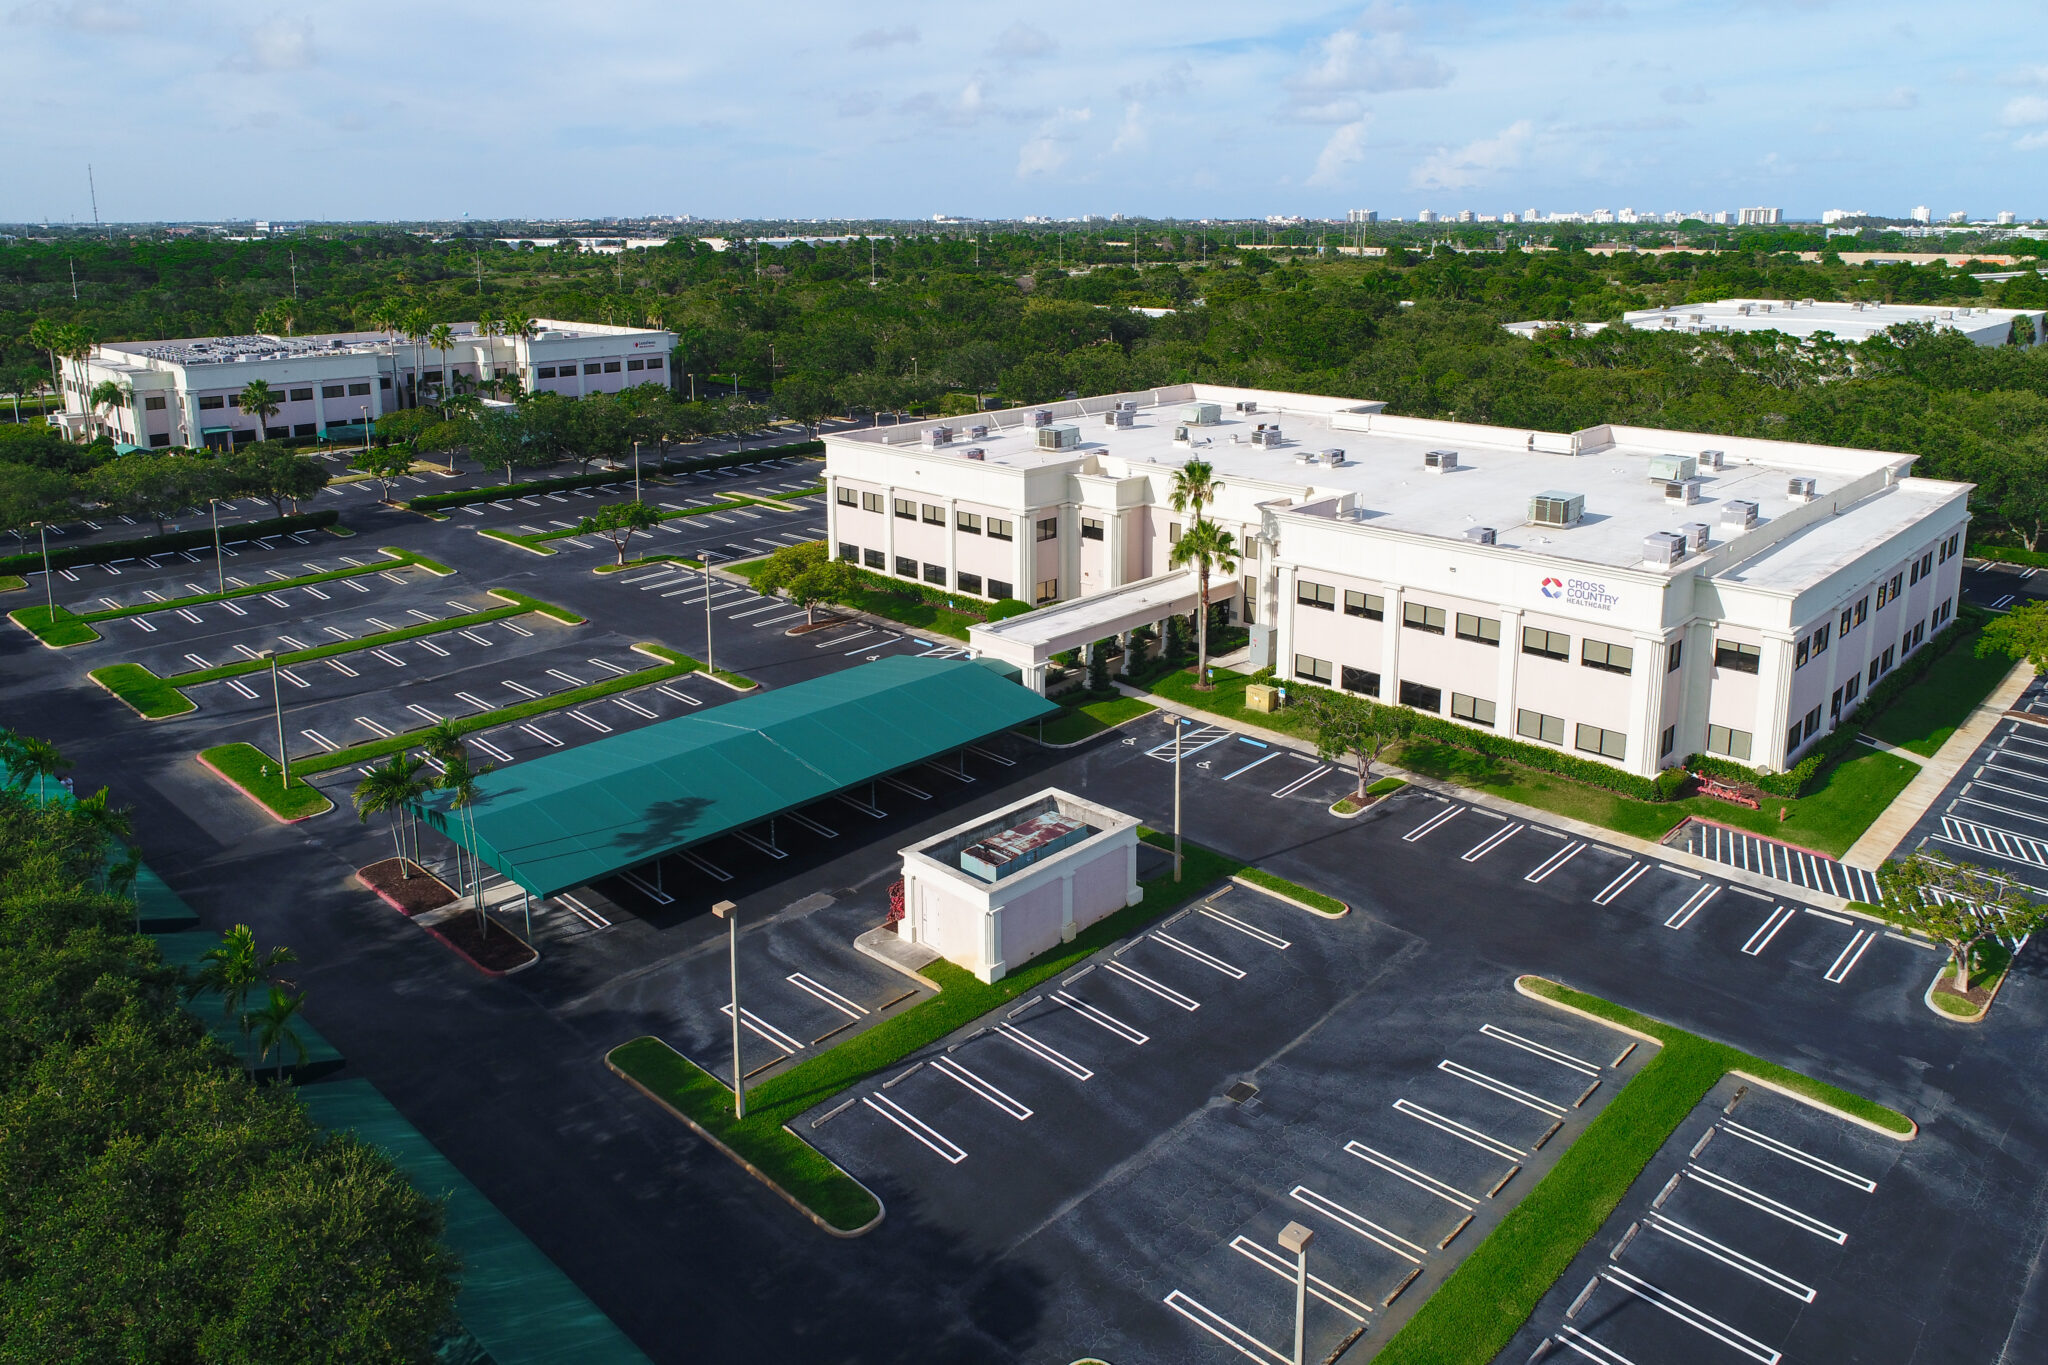 PEBB Enterprises purchases Boca Raton office property for $29.85 million with partner Contrarian Capital Management